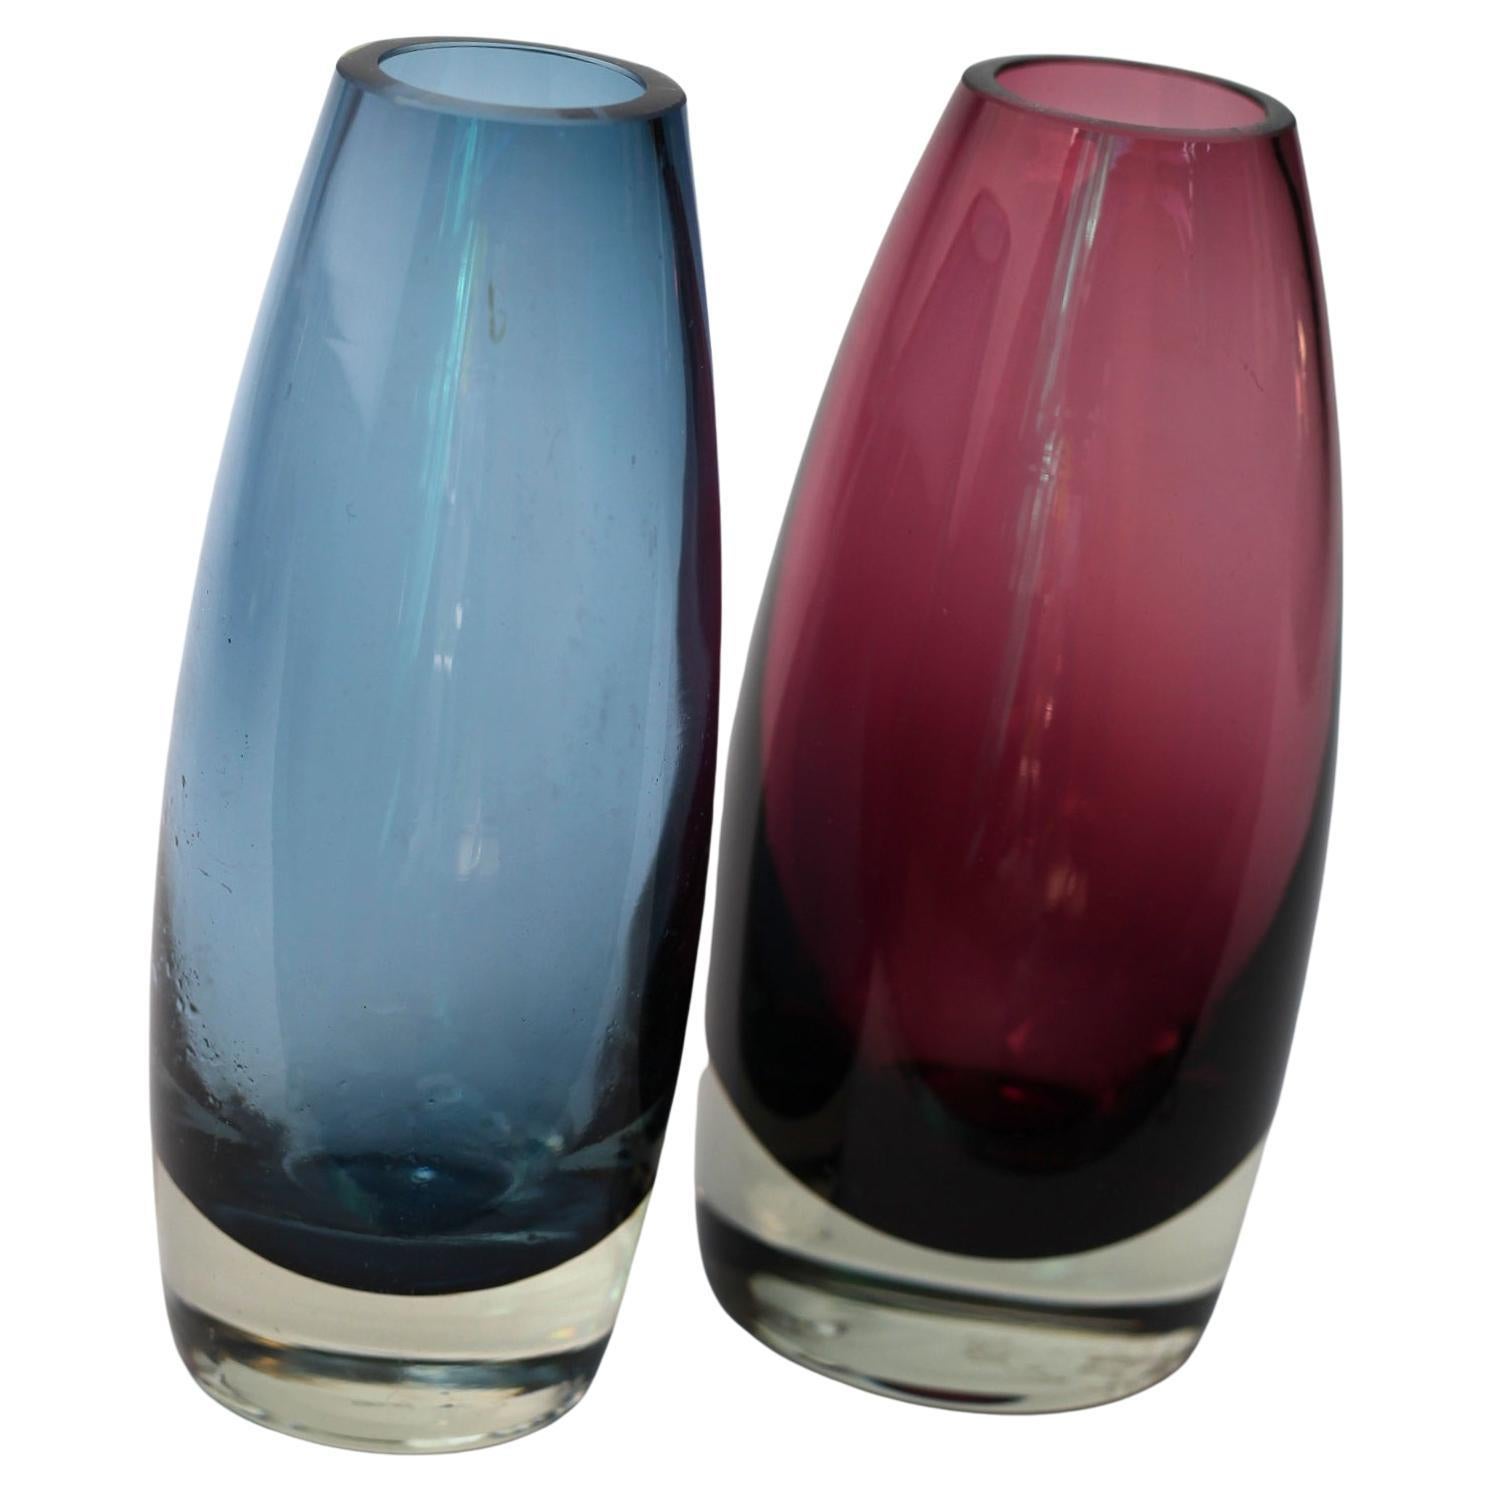 Midcentury Glass Vases by Tamara Aladin for Riihimaen Riihimaen from Finland For Sale